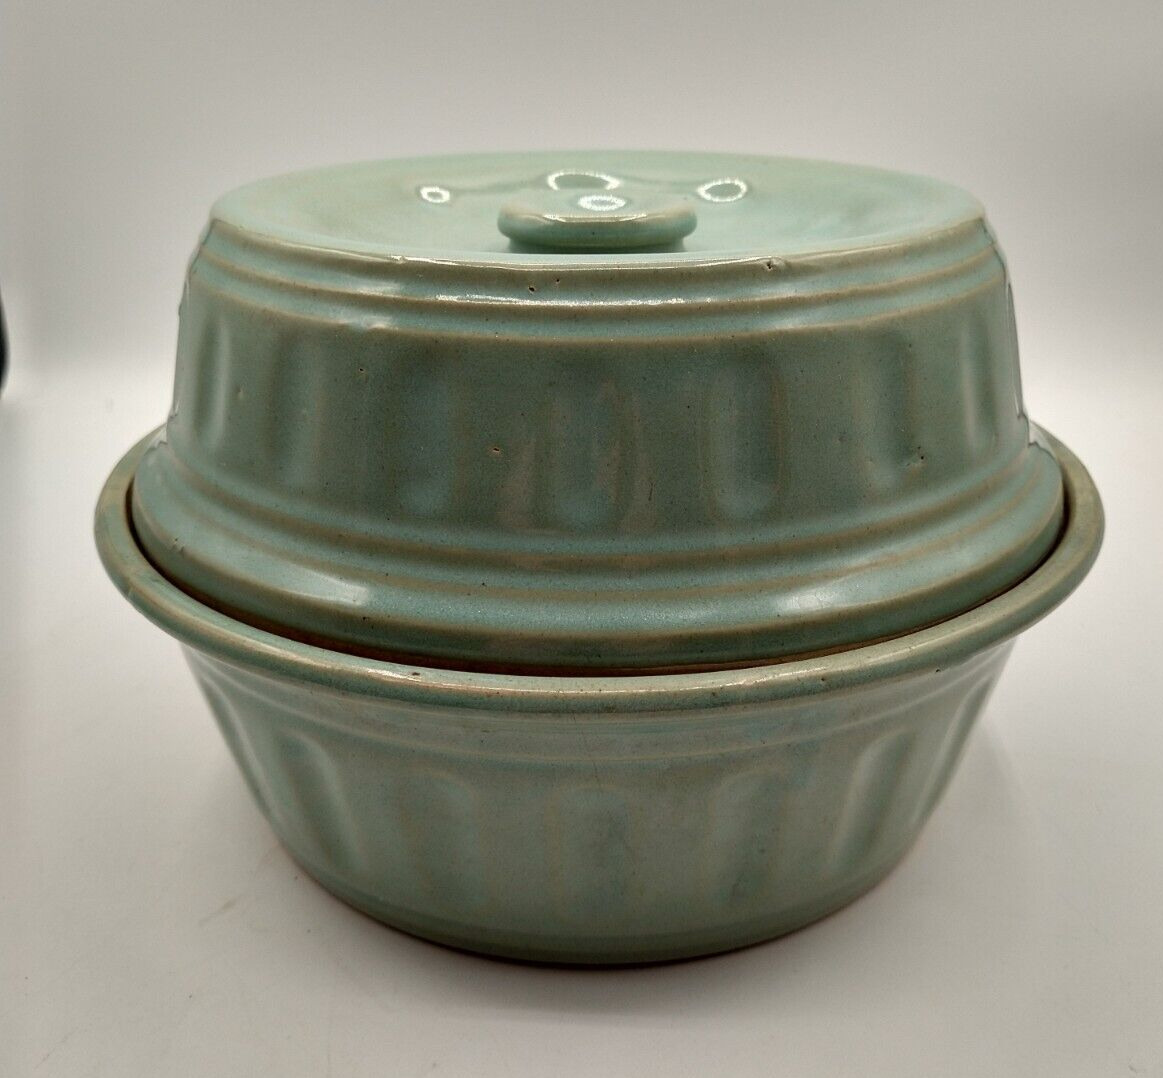 Green Dutch Oven '40s McCoy Pottery Covered Casserole Dish Stoneware Made in USA